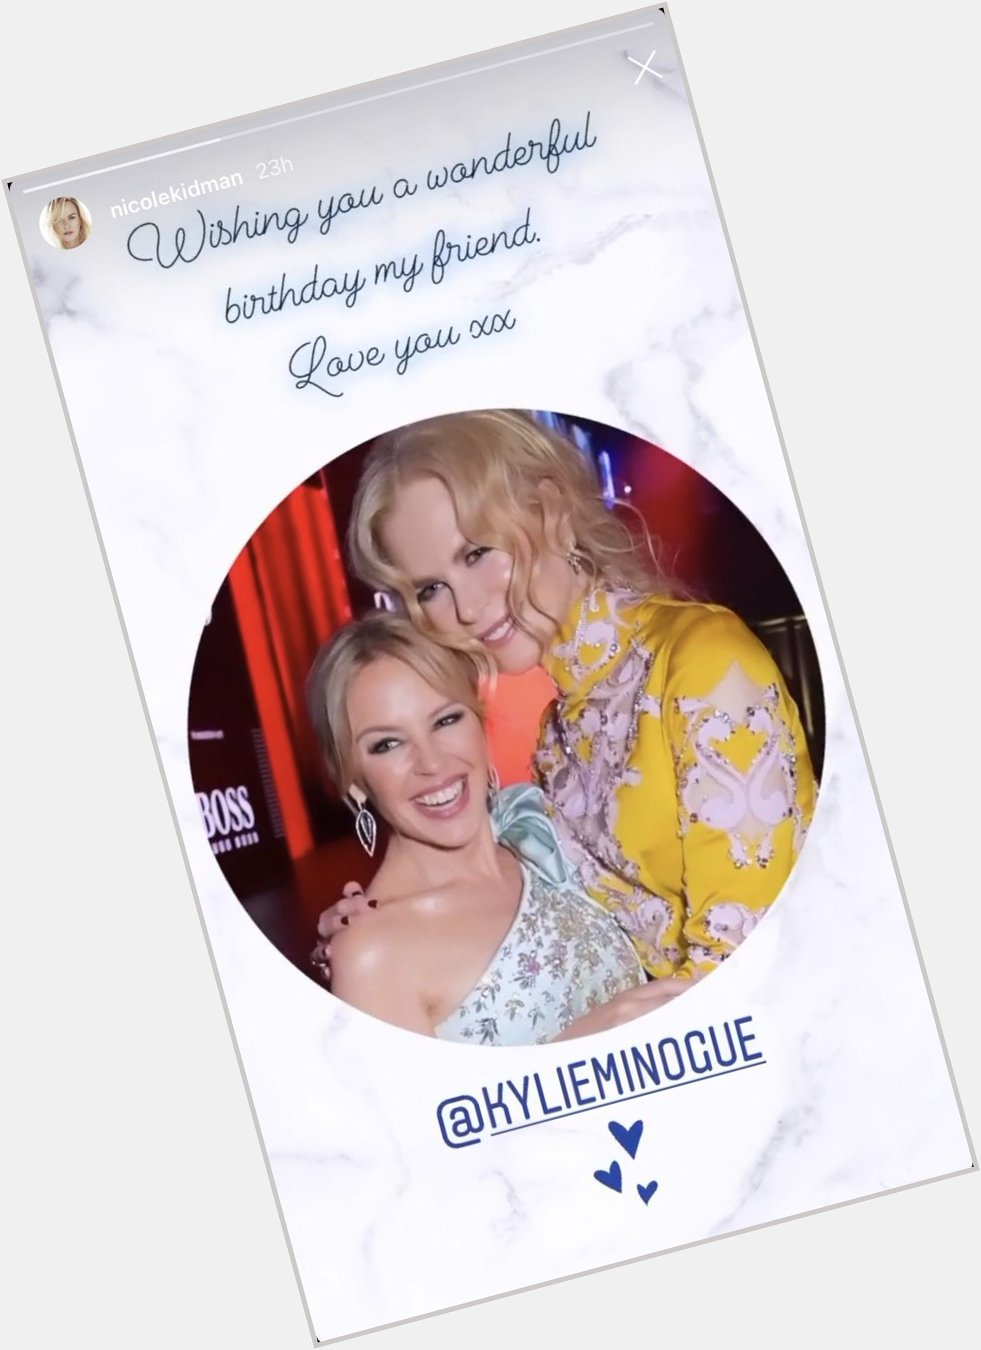 Nicole Kidman wishing Kylie Minogue a happy birthday on her Instagram story. I can t handle all of this queenery. 